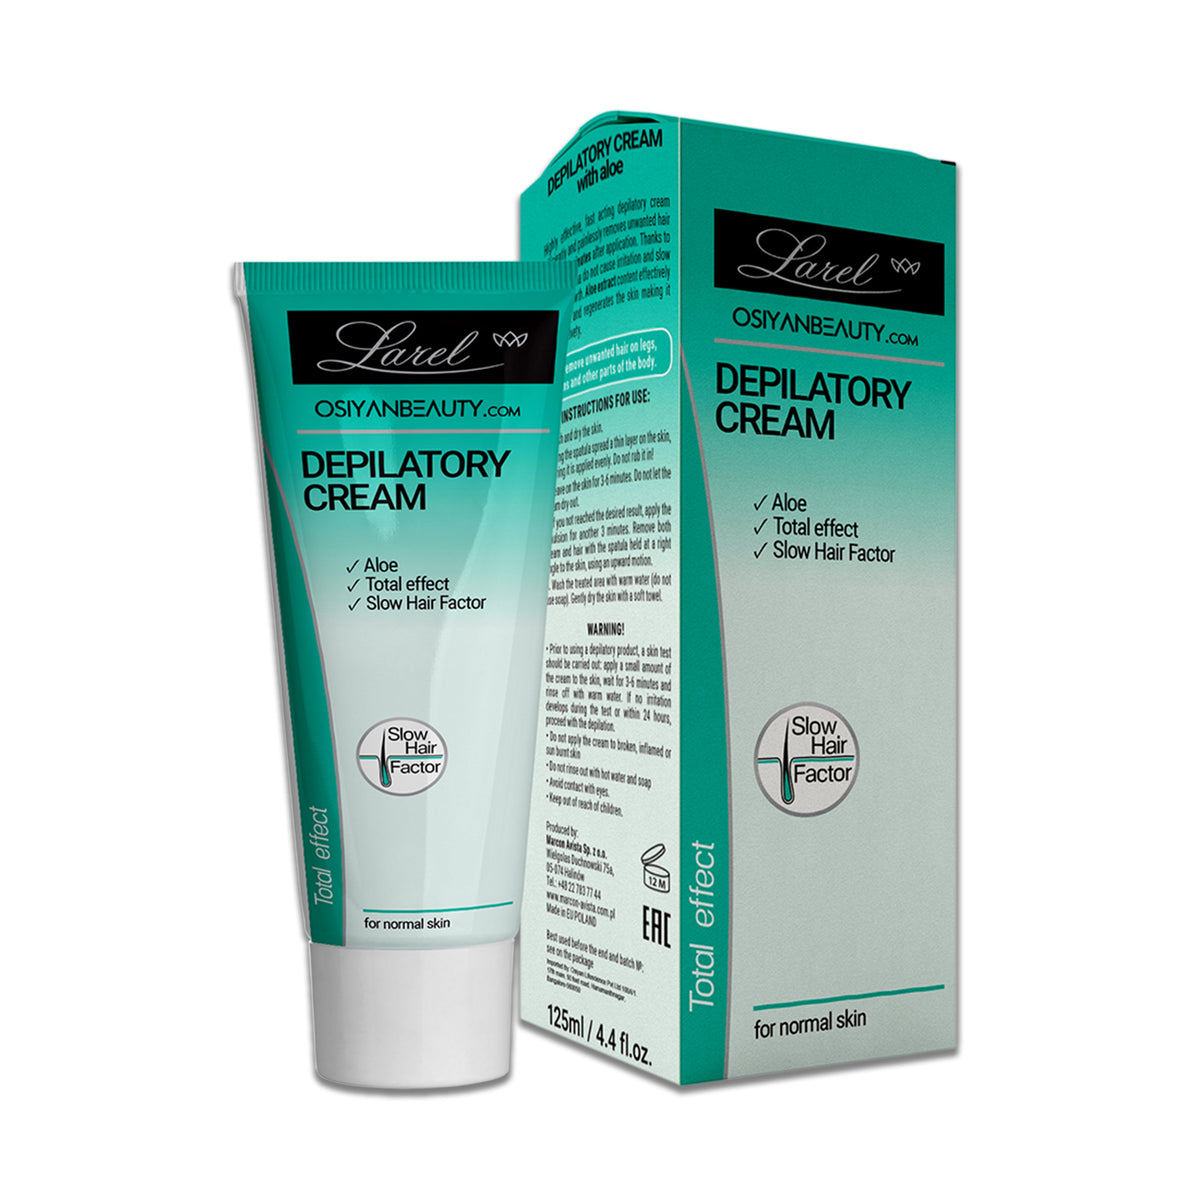 Depilatory cream  Aloe, Total Effect and slow hair factor(Made in Europe)